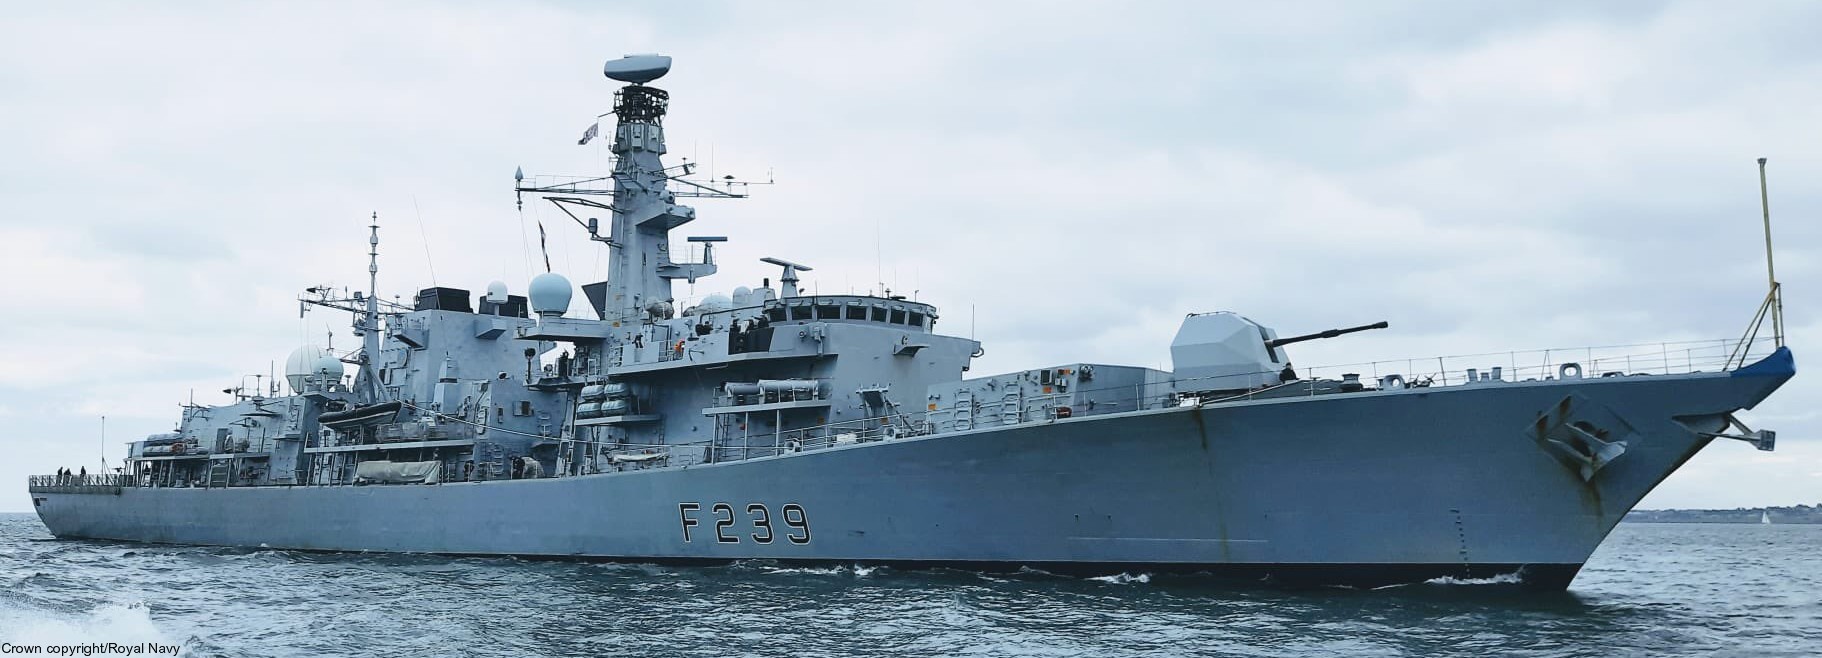 f-239 hms richmond type 23 duke class guided missile frigate ffg royal navy 30